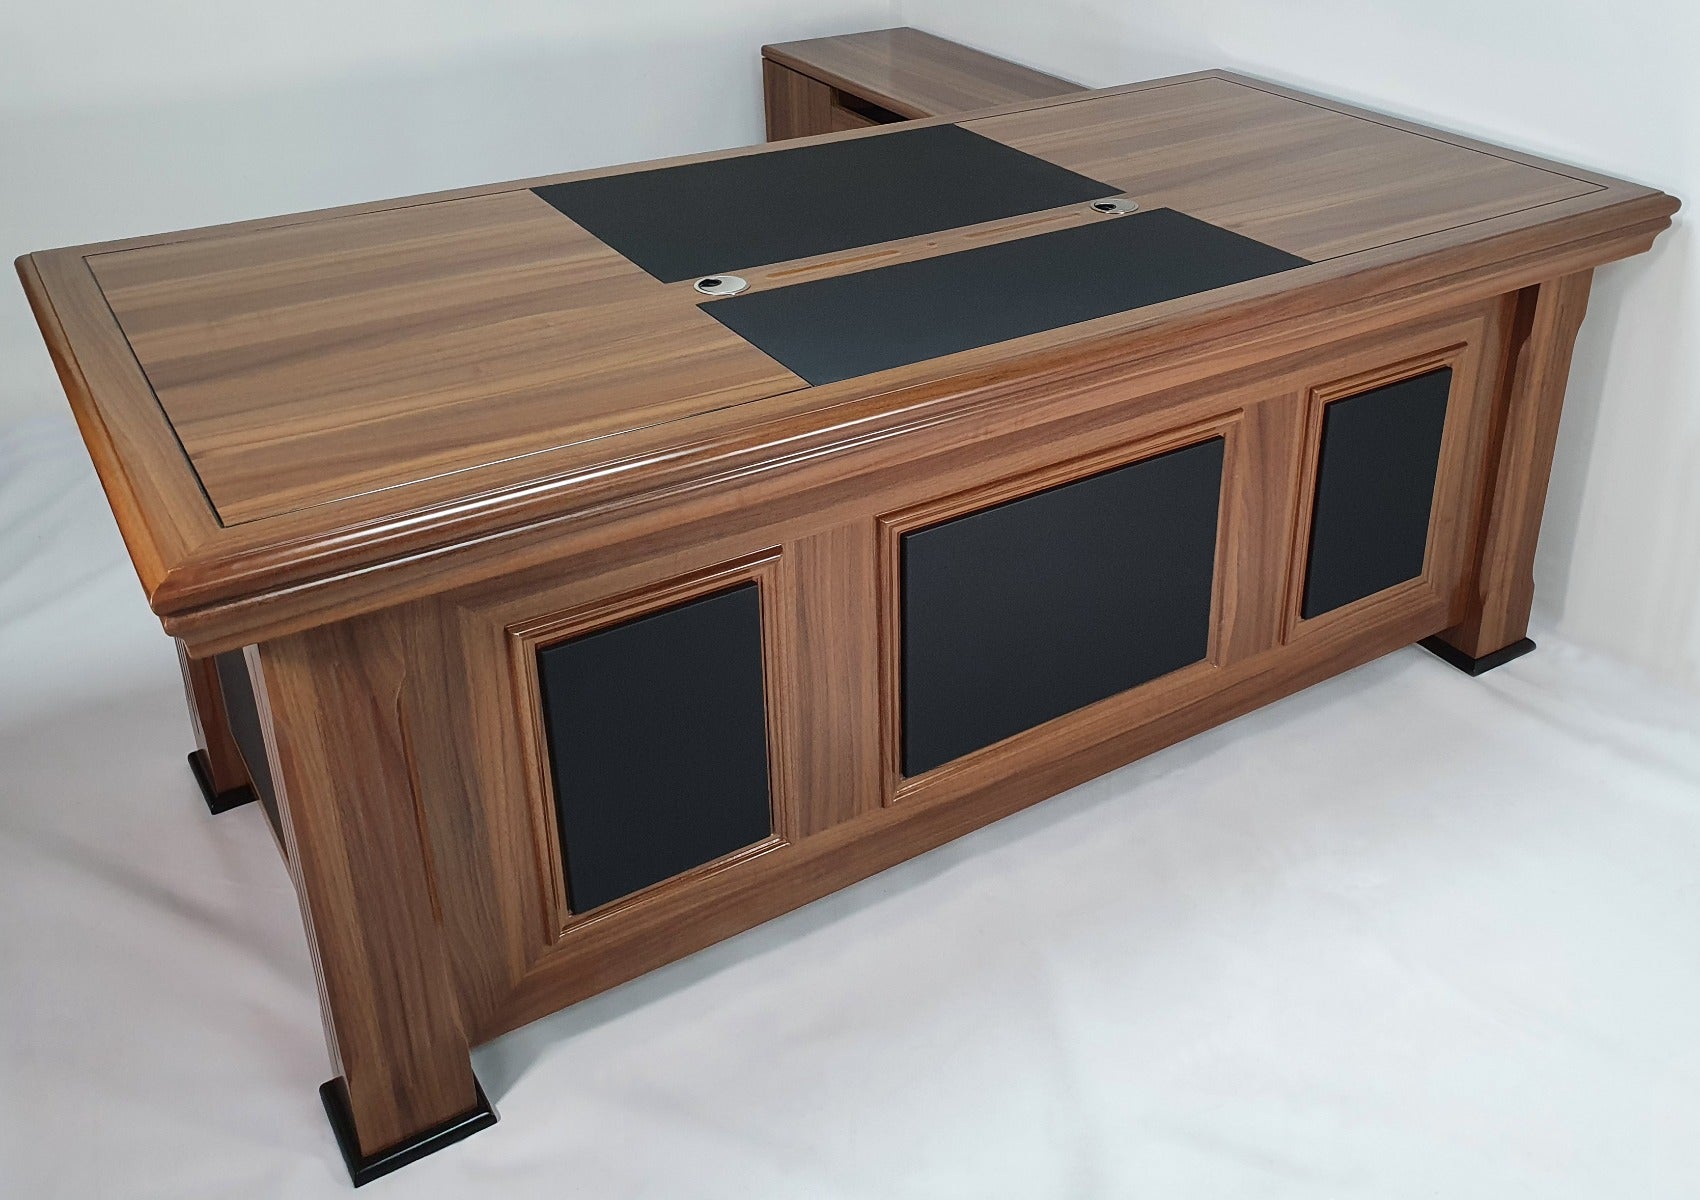 Light Oak Executive Desk With Leather Detailing - With Pedestal and Return - 2233 Huddersfield